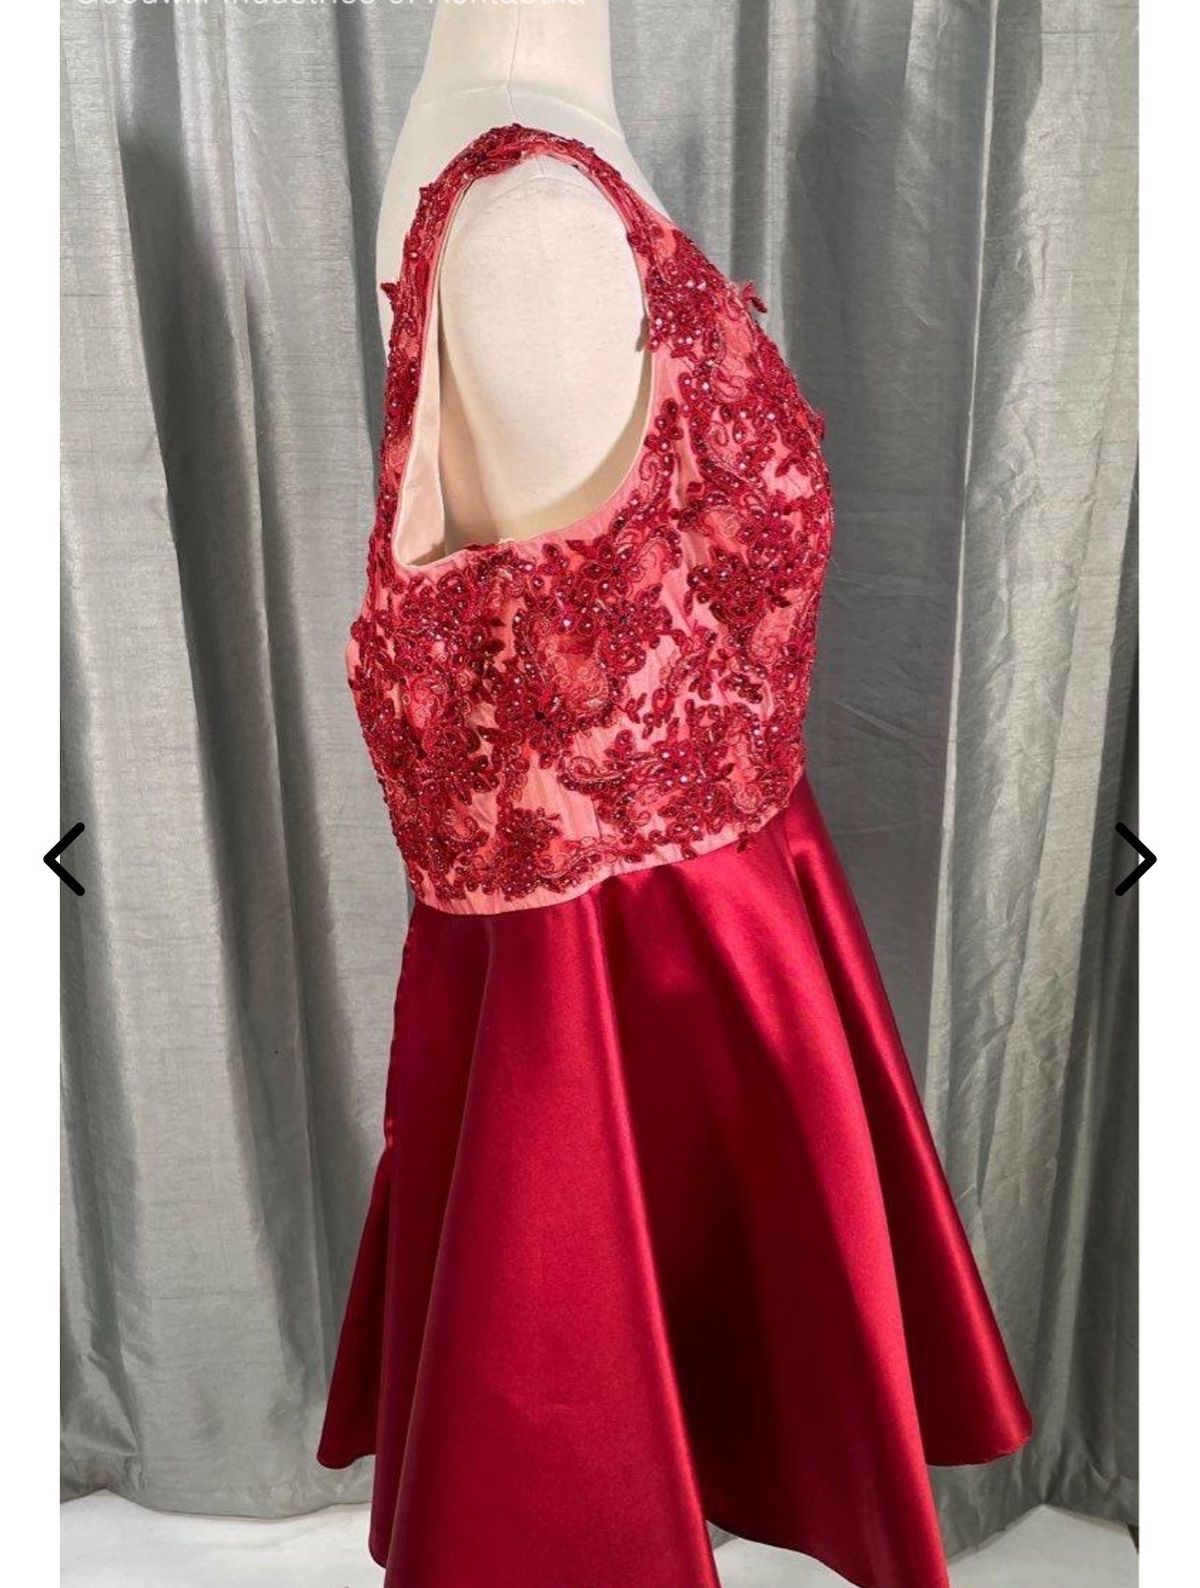 Plus Size 24 Homecoming Plunge Lace Burgundy Red Cocktail Dress on Queenly